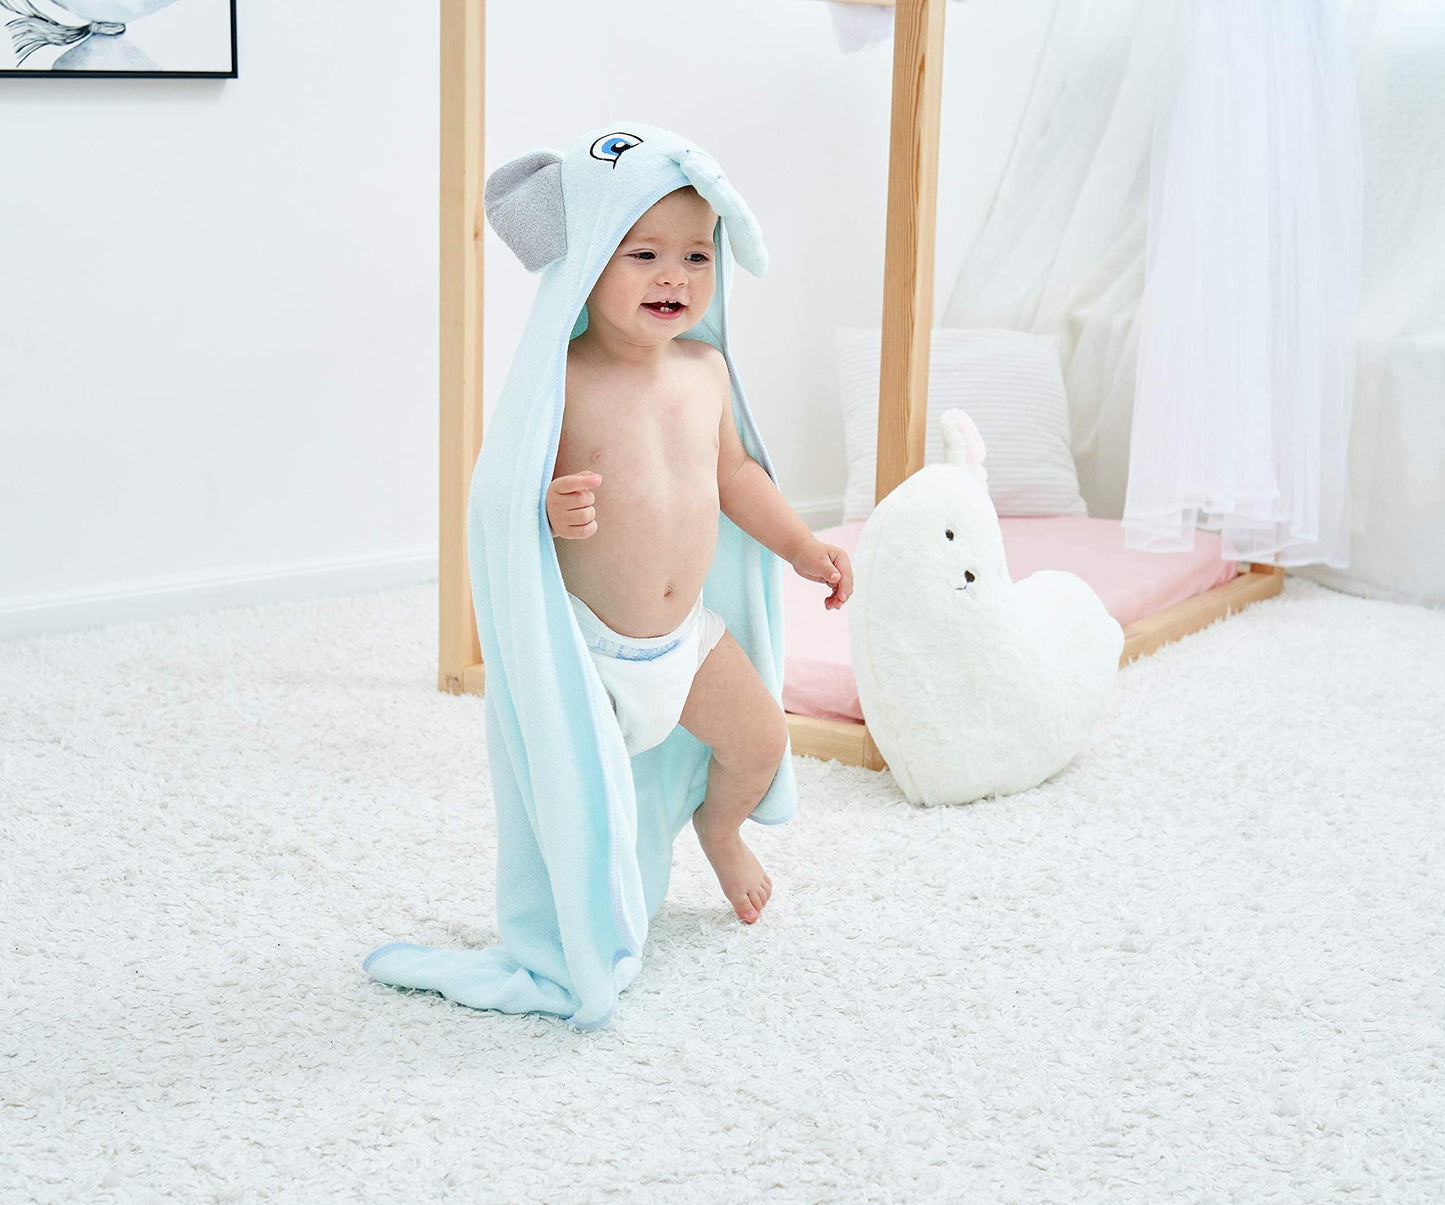 HIPHOP PANDA X - Large Bath Towel for Toddler and Kids - Rayon Made from Bamboo, Pink Ear 3D Unicorn Hooded Bath Towels for Babies - Perfect 1-6 Year - (Unicorn, 37.5 x 37.5 inch)